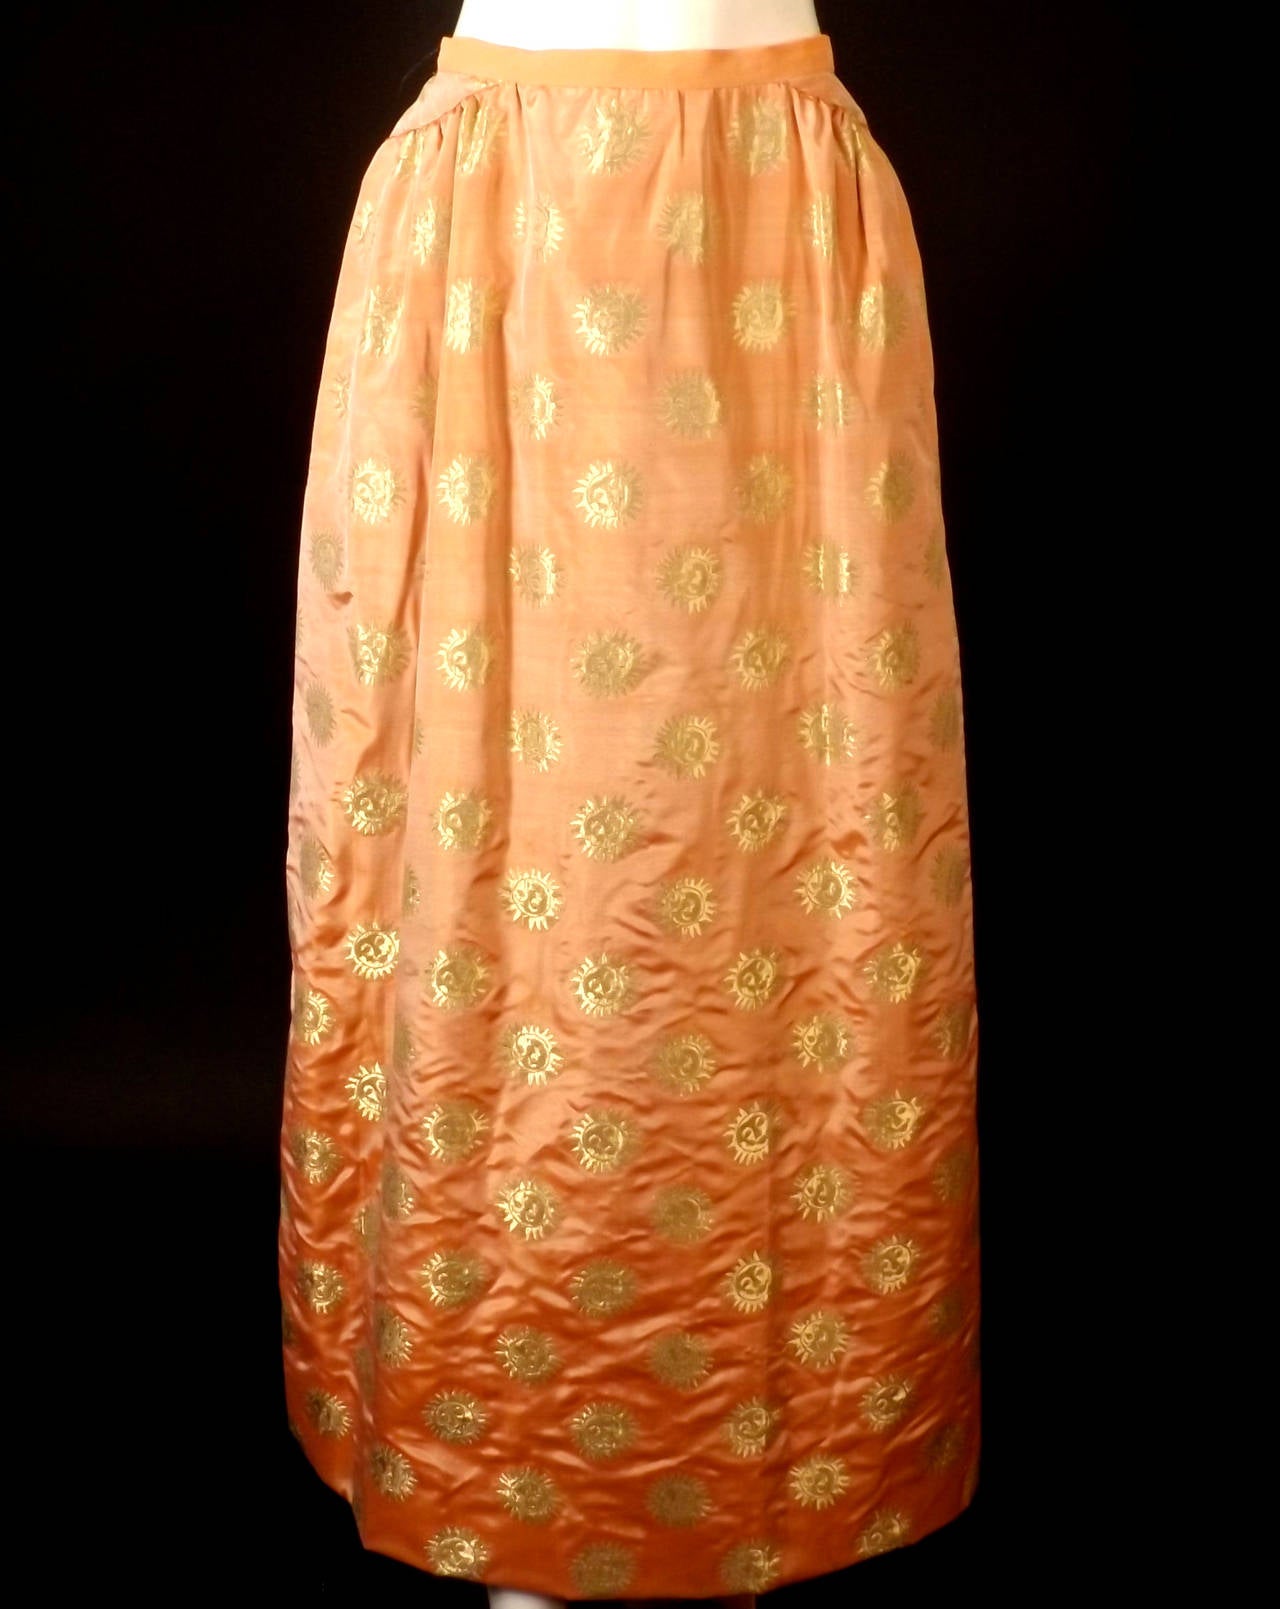 Amazing 2pc ball gown from the late 1980s in a peach and gold silk brocade. The pattern on the brocade is a sun with a smily face. The Elizabethan style bodice has a windowpane pattern in gold beading with sparkling aurora borealis crystals each